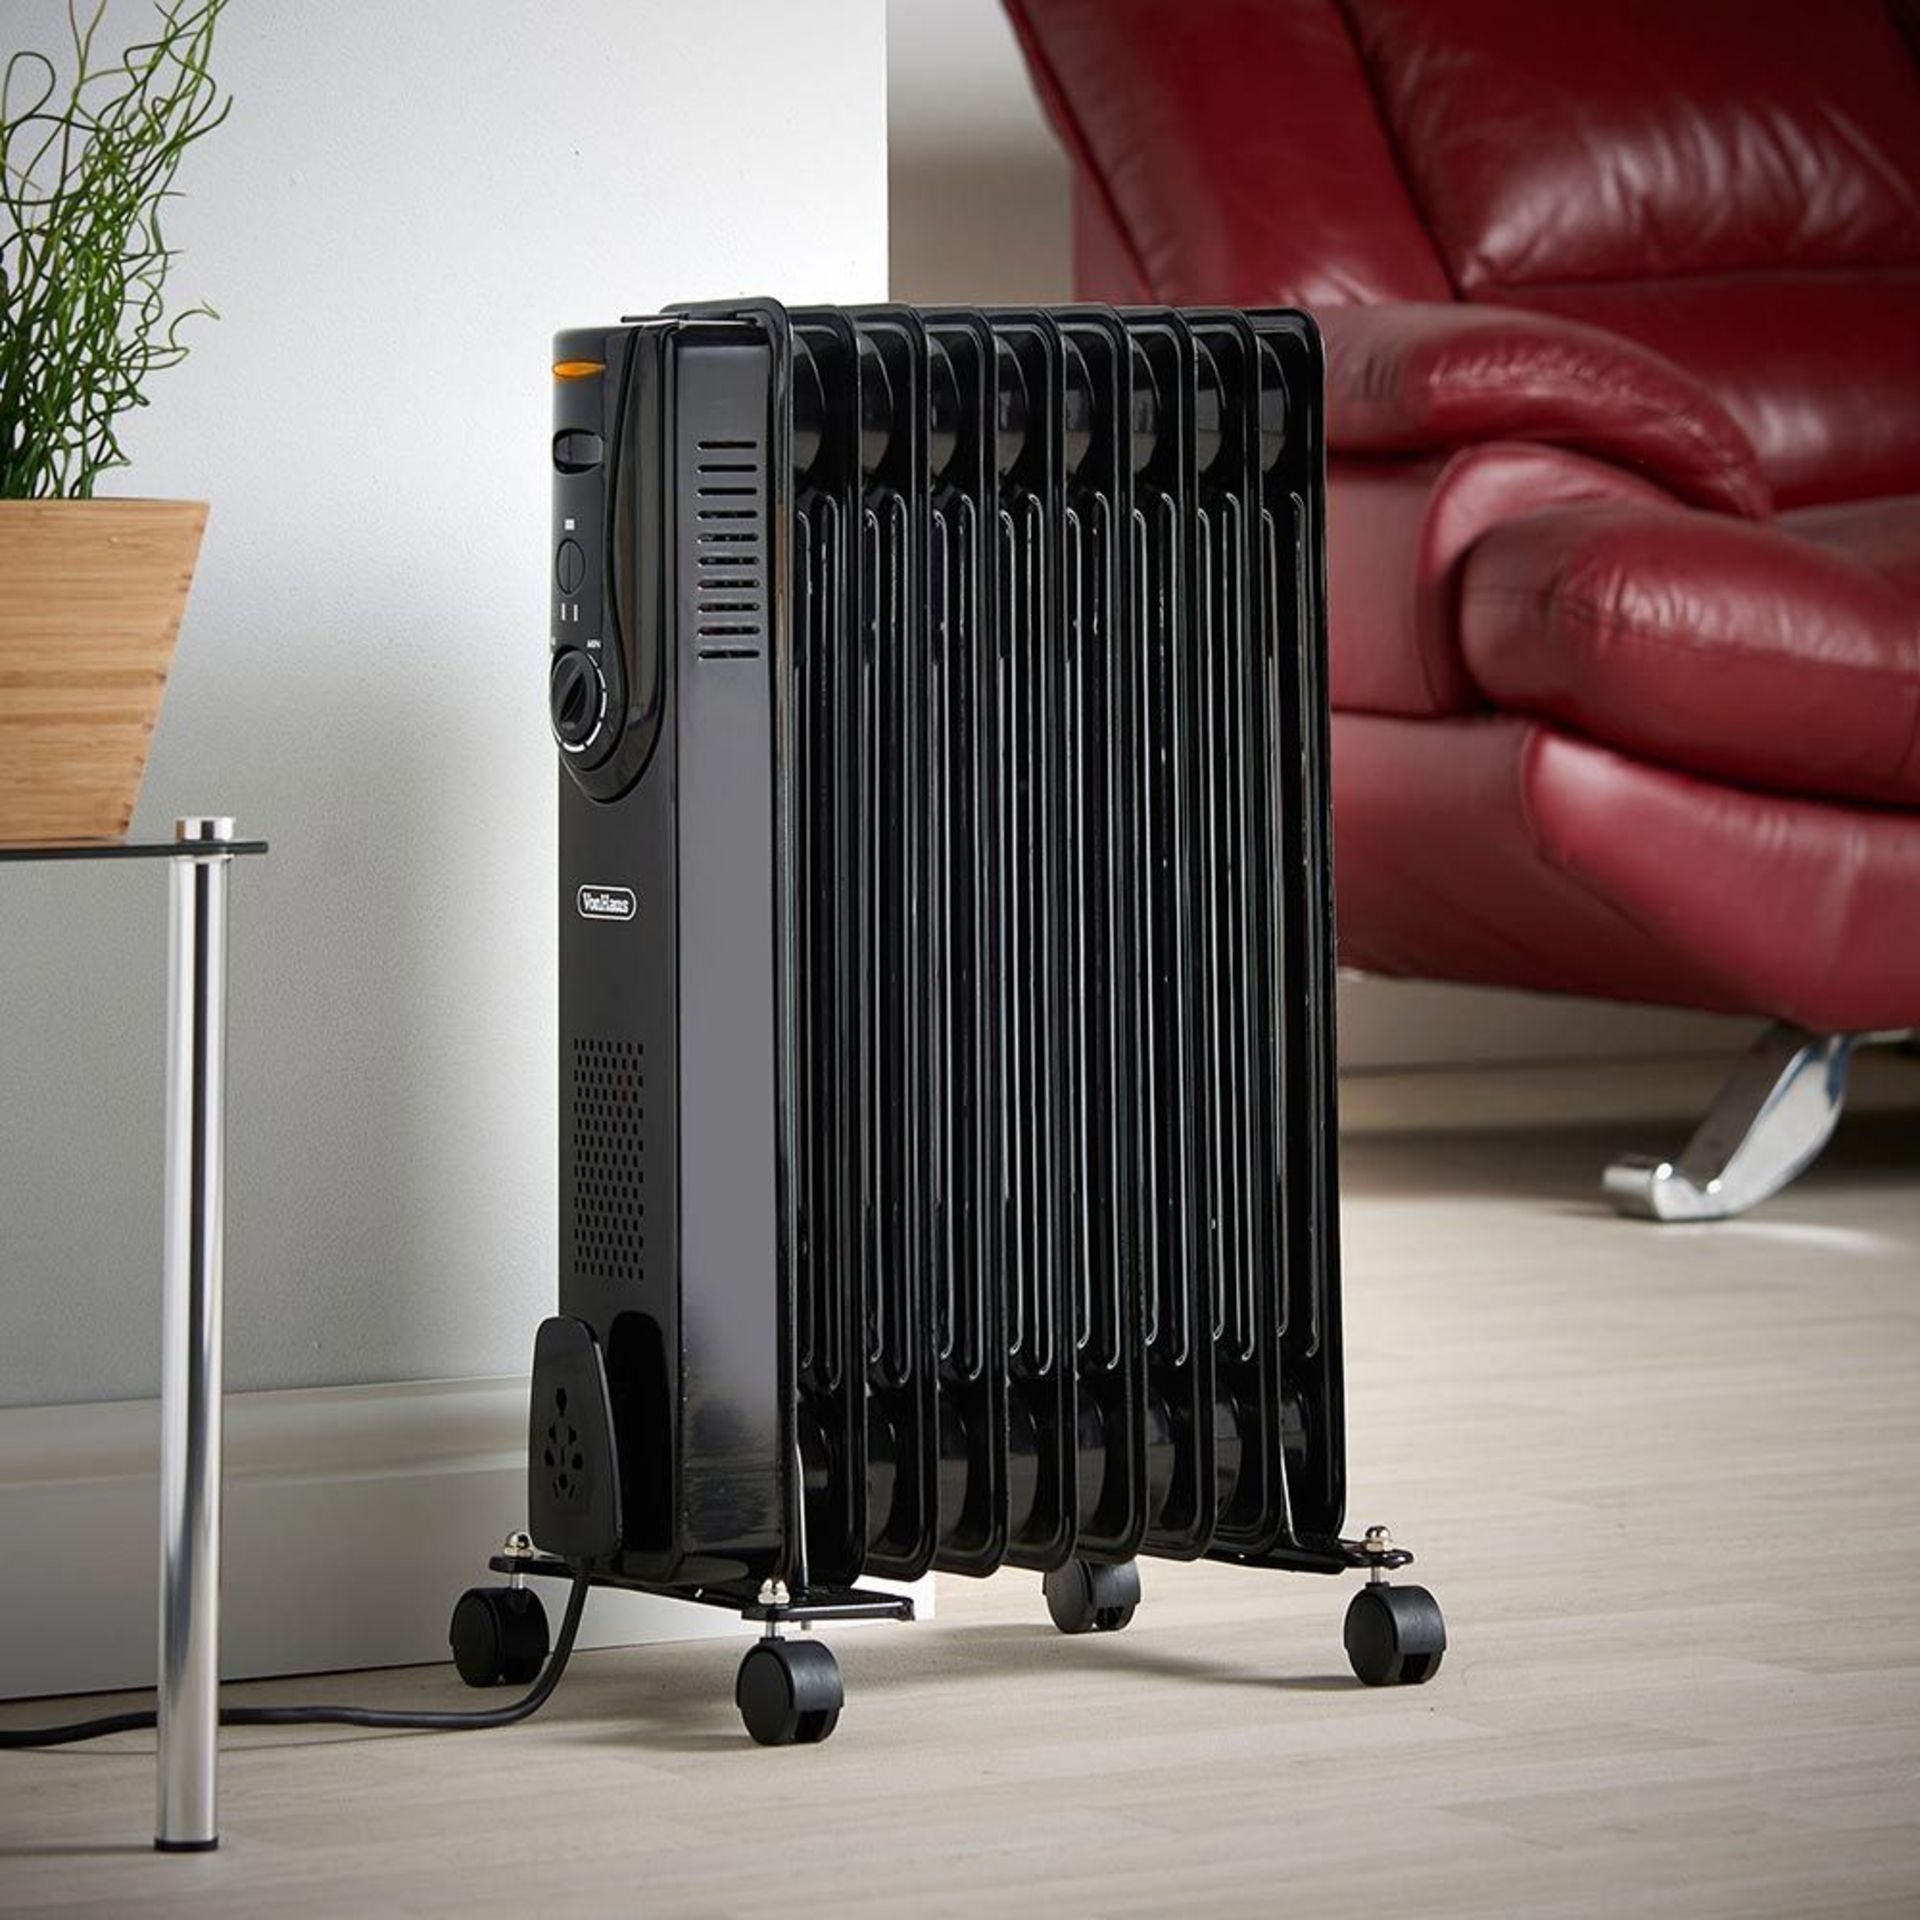 (H67) 9 Fin 2000W Oil Filled Radiator - Black Powerful 2000W radiator with 9 oil-filled fins ?... - Image 2 of 3